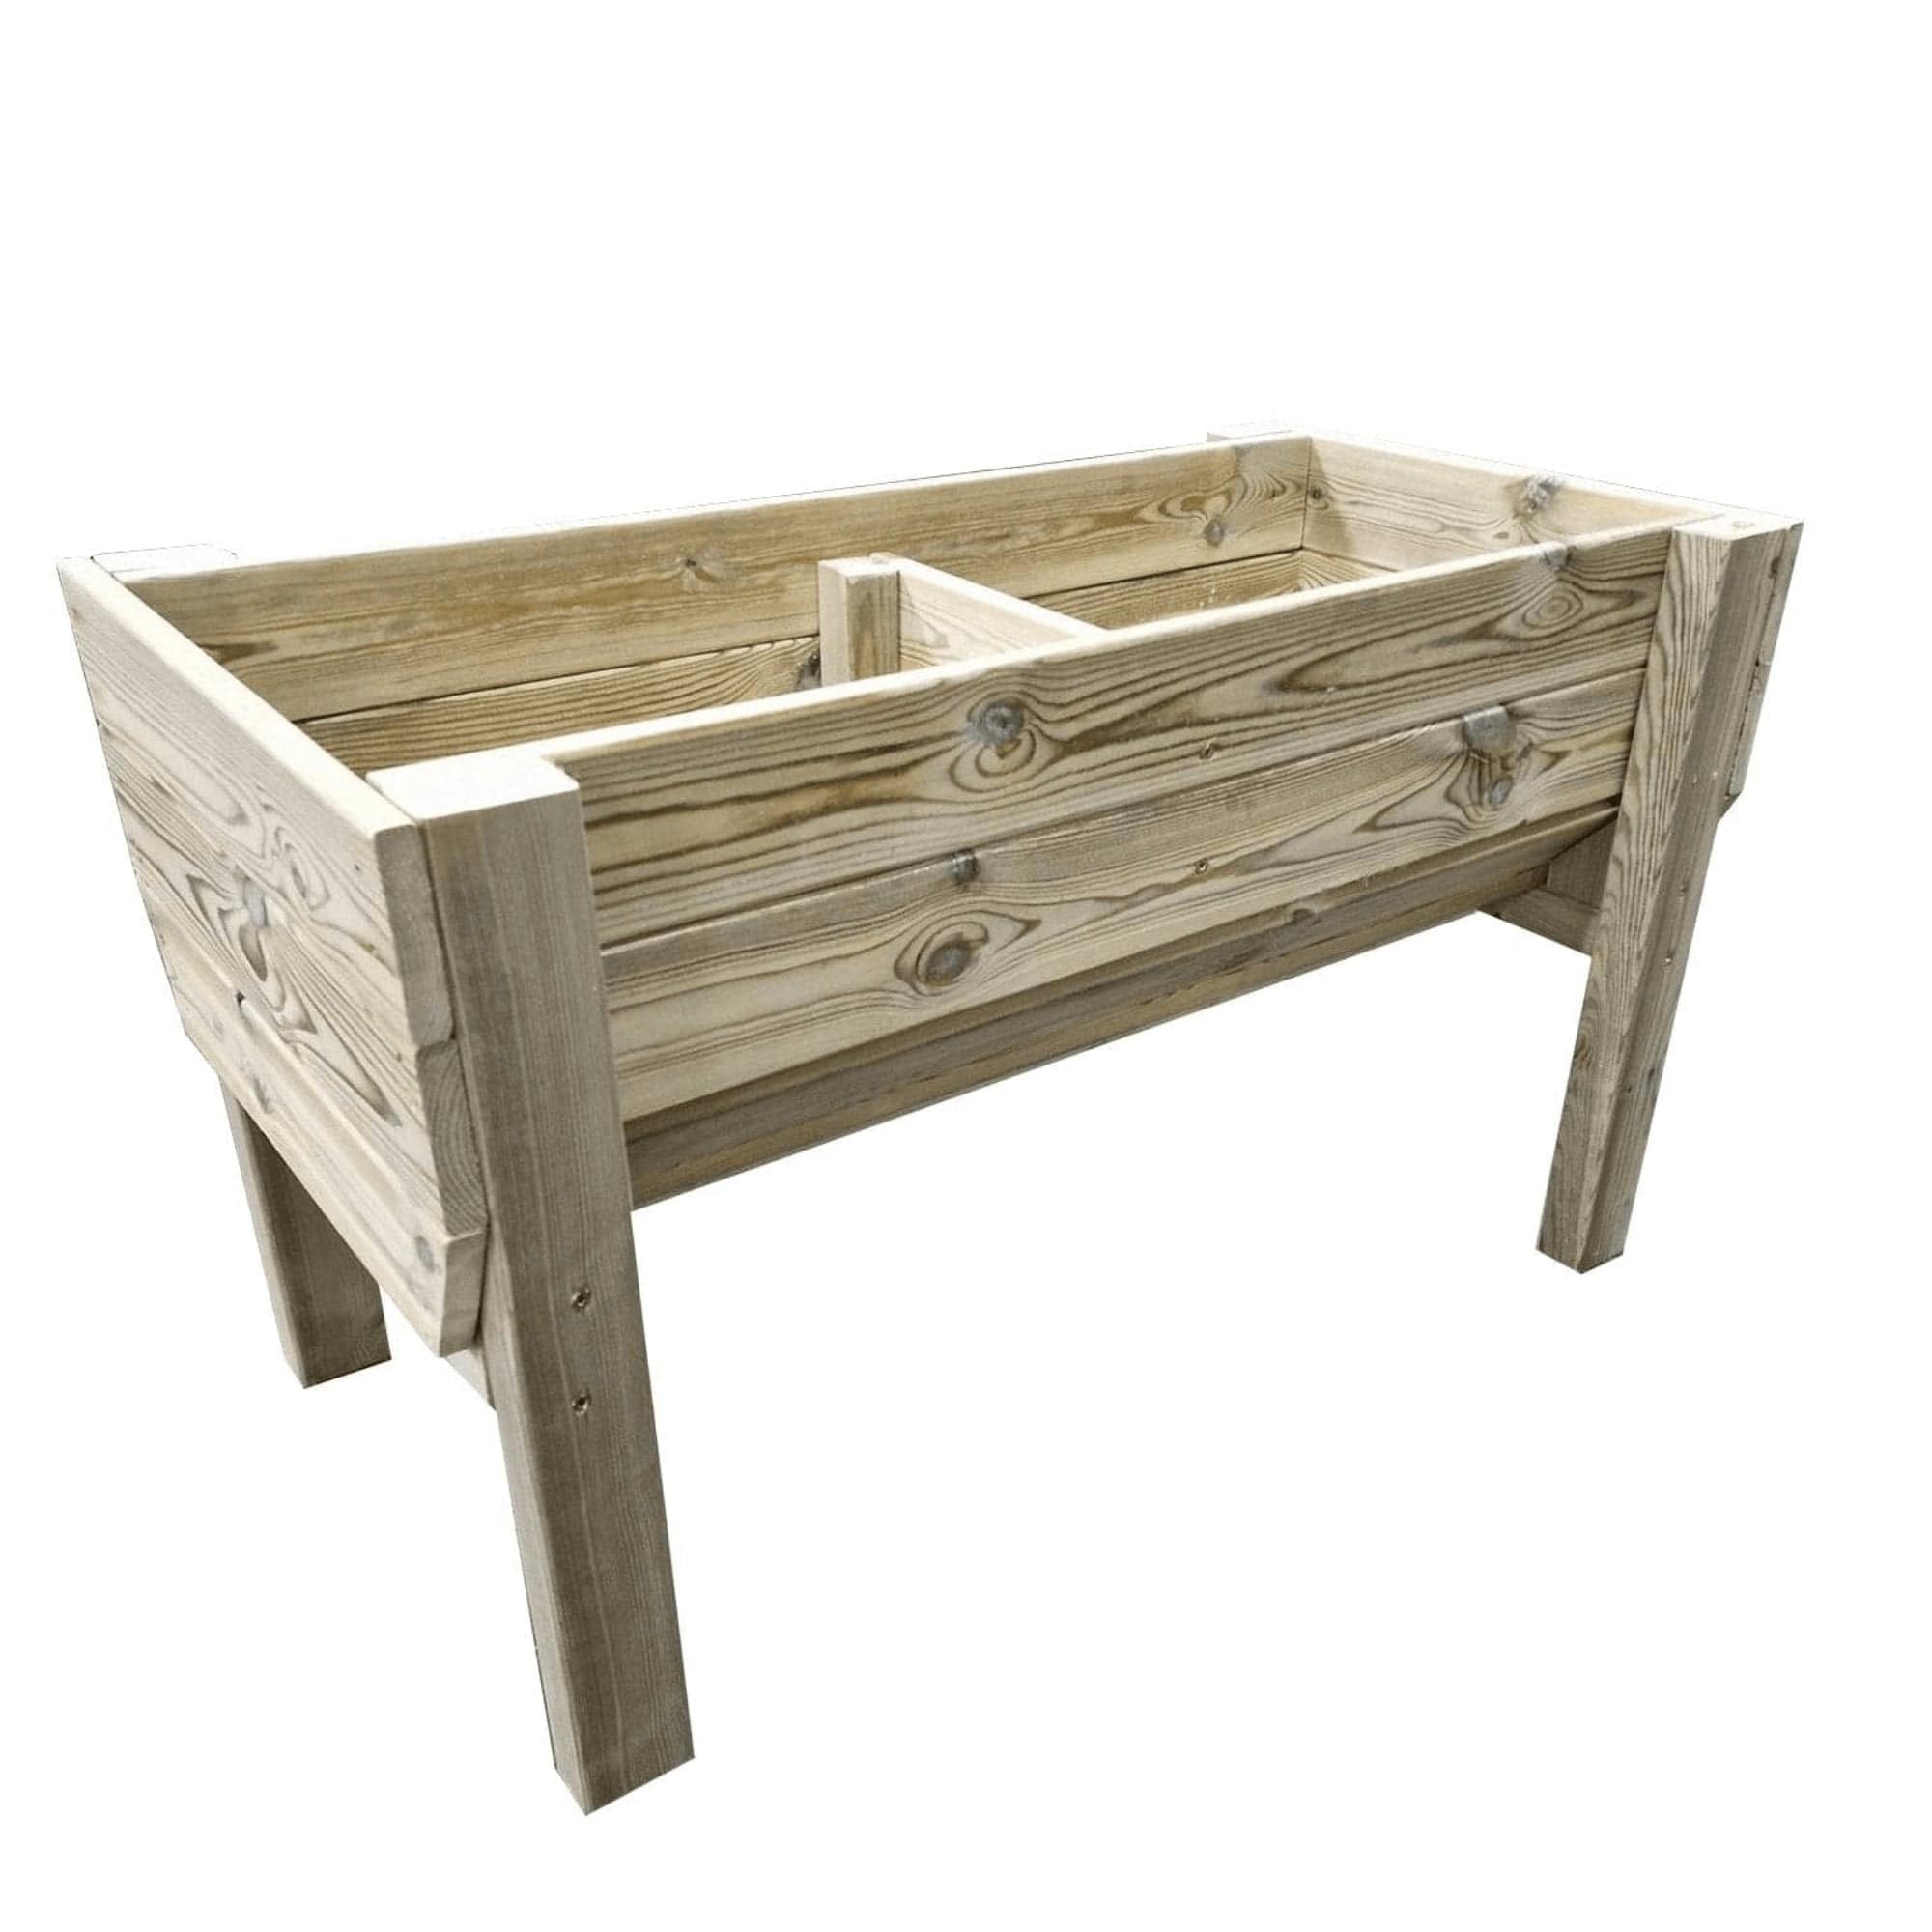 Veg trough planter serving as a functional and decorative feature in outdoor spaces.